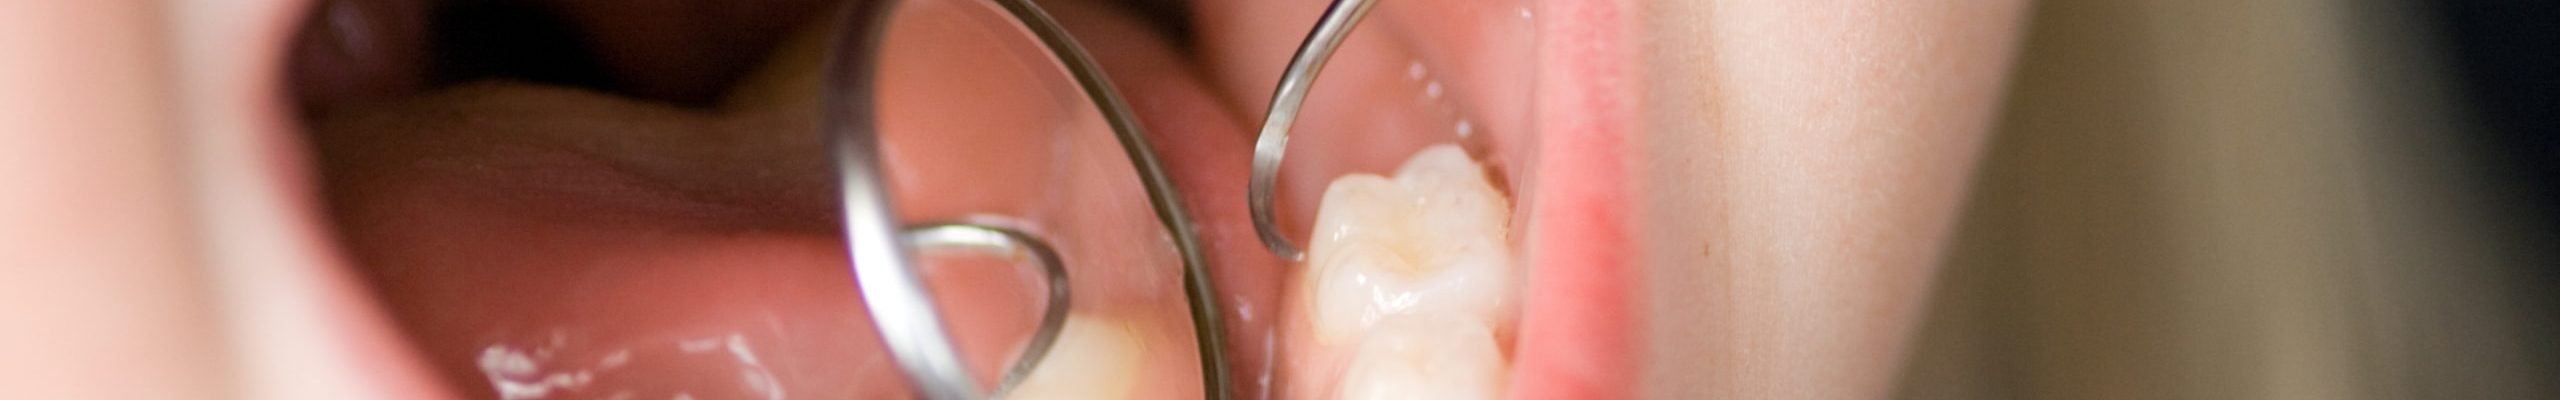 Most kids start getting their permanent teeth around the age of six, and this includes the molars. Here’s what parents need to know about when molars come in and what they can do to help their children get through the process.